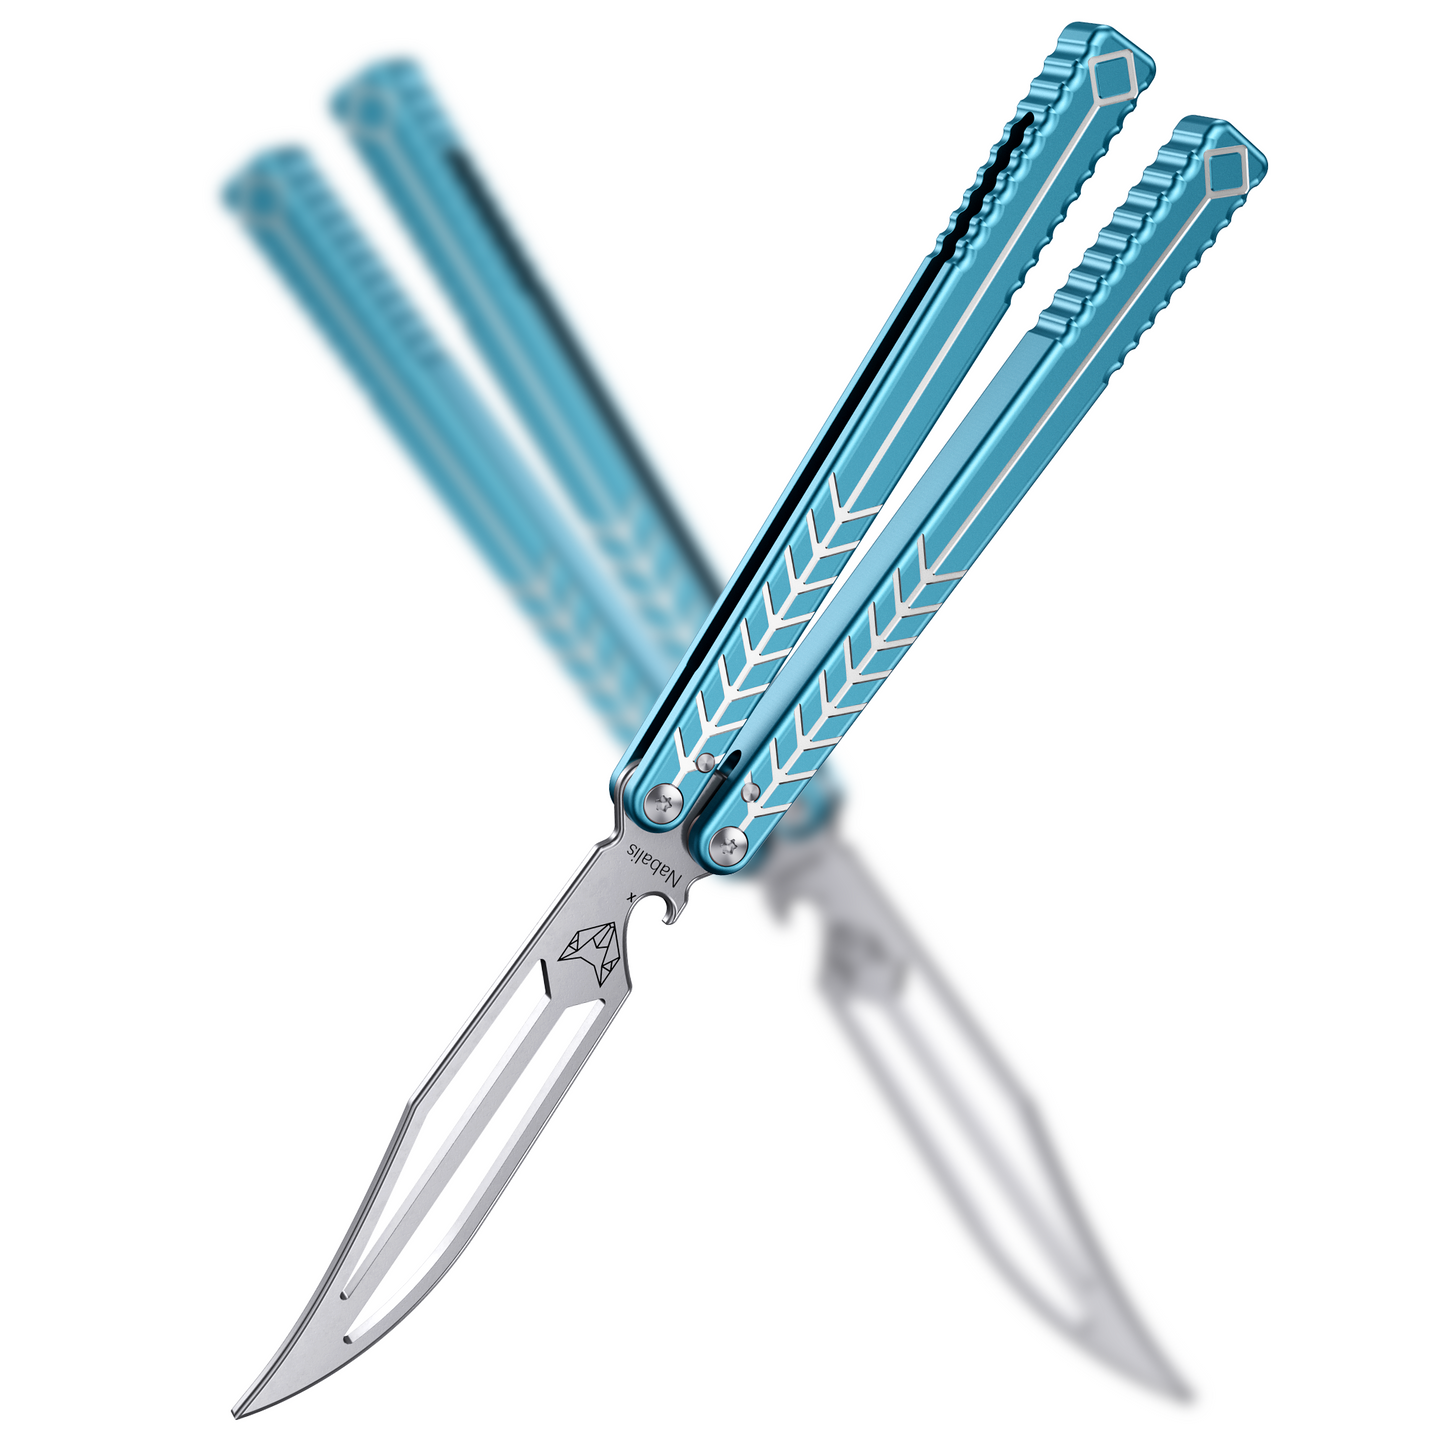 The Vulp Butterfly Knife Balisong Trainer - The first trainer of Nabalis x Will Hirsch